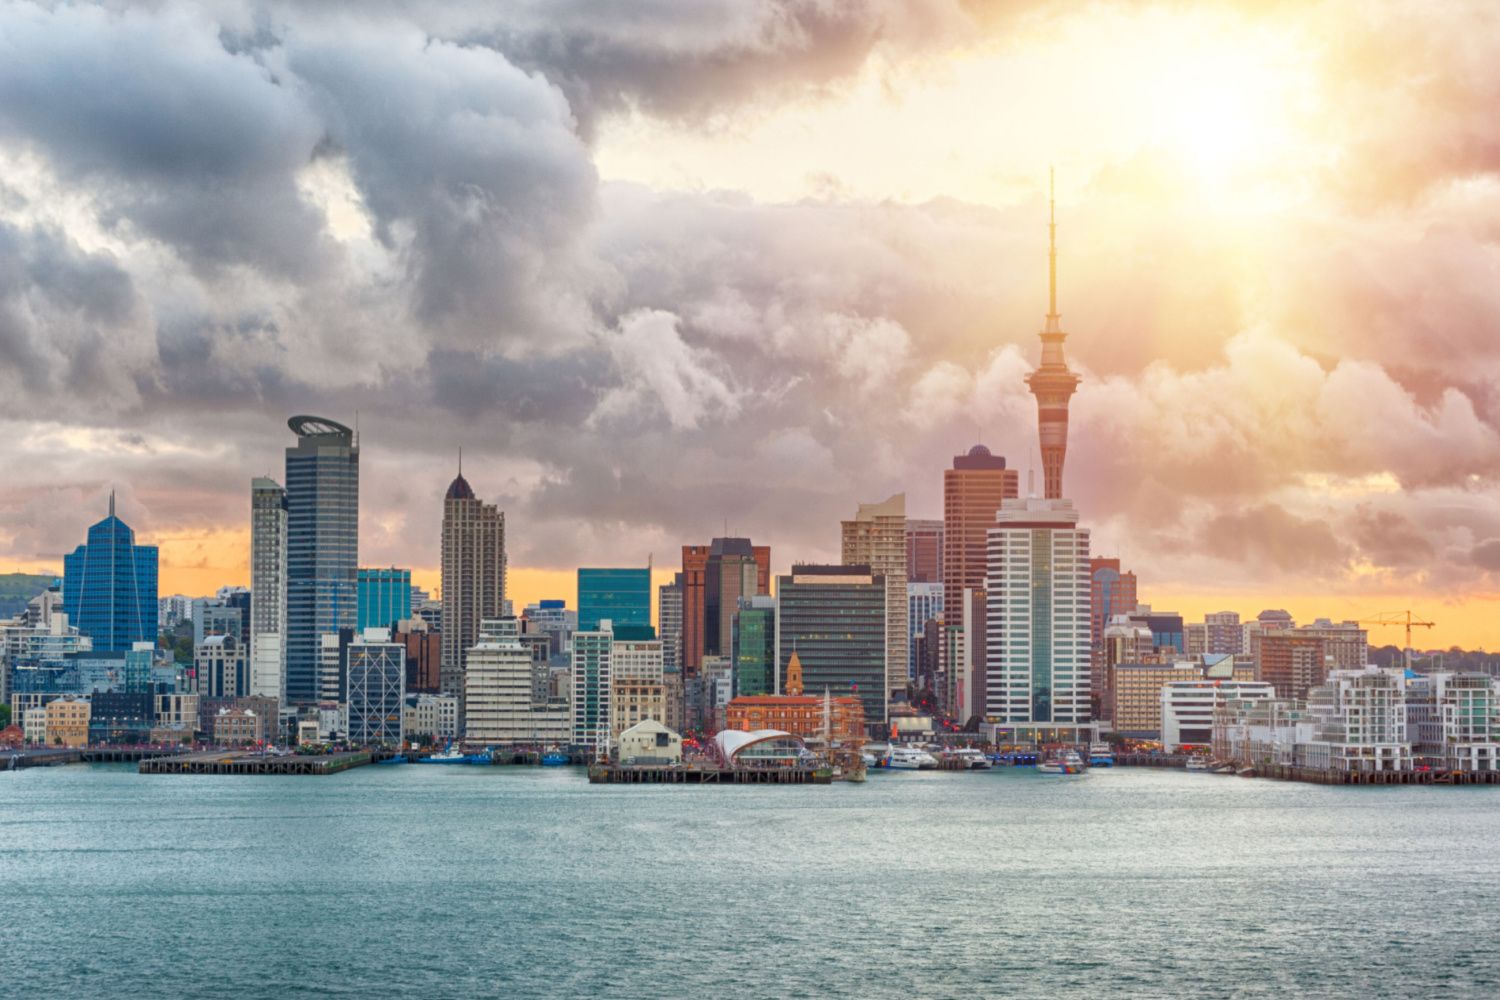 New Zealand Insurers to Increase Focus on Culture and Conduct